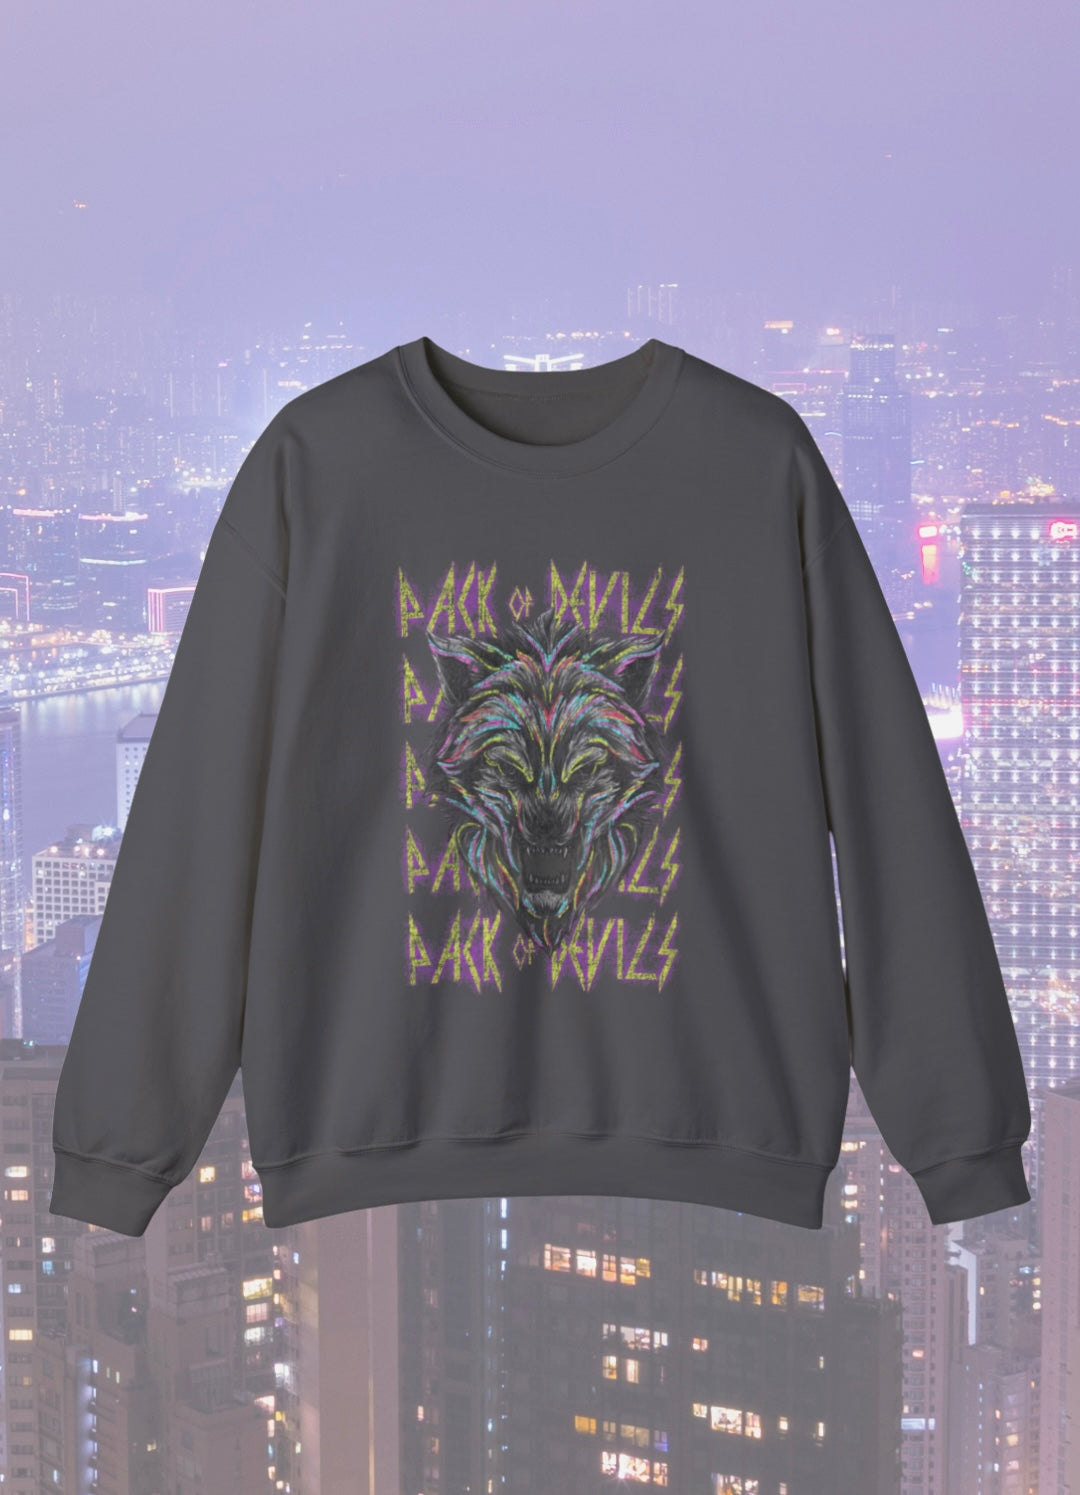 Pack of Devils (Repeating Text) Band Sweatshirt